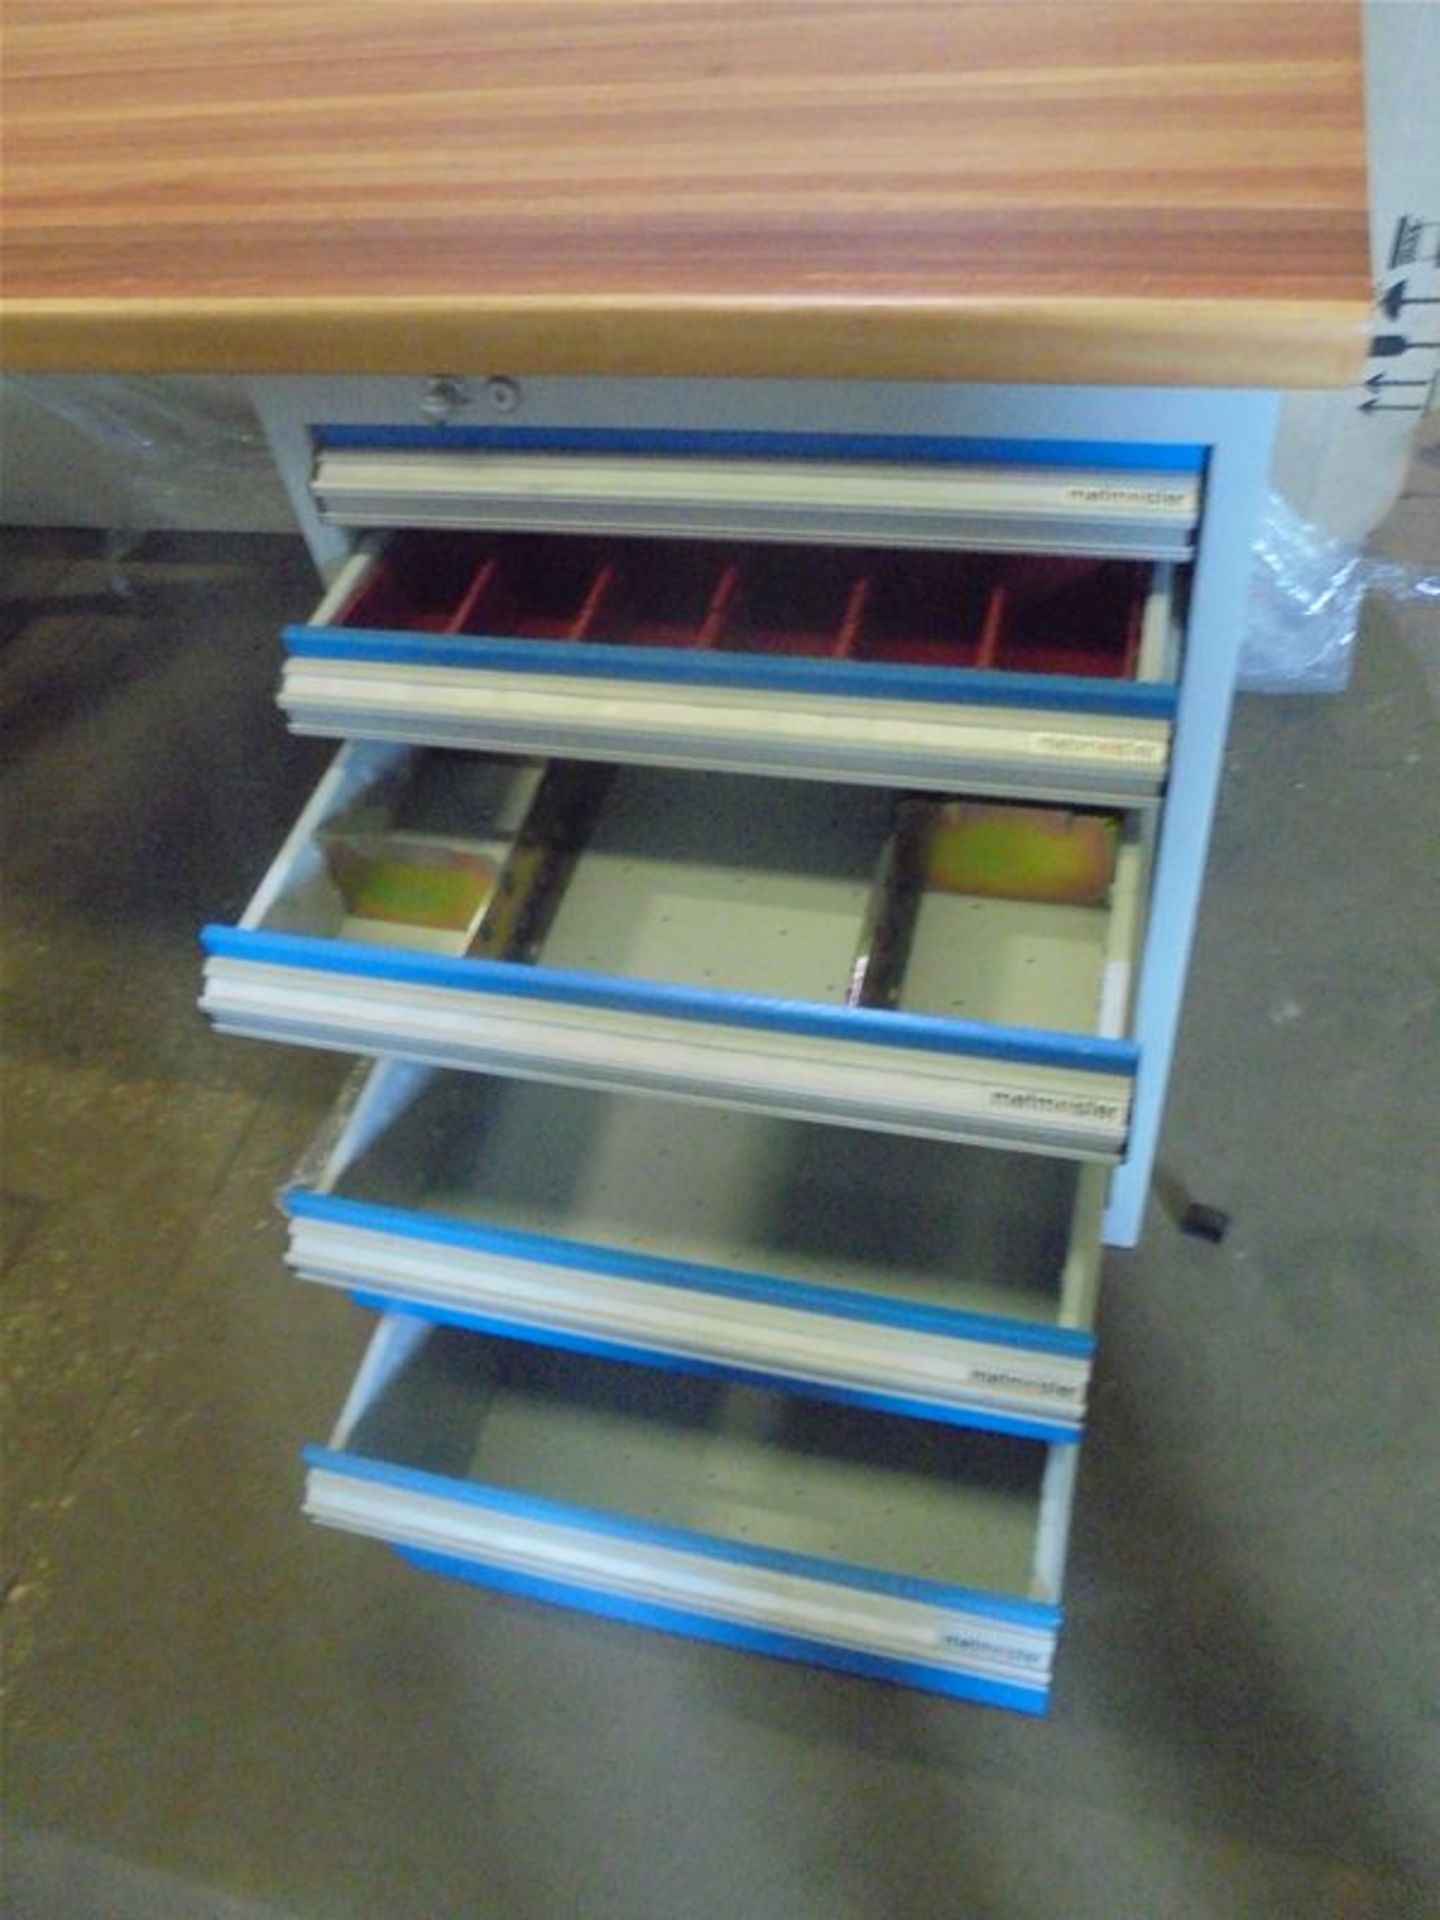 Workbench WKS 500-20T with Saligna Top and C850 Cabinet Drawer - Image 3 of 3